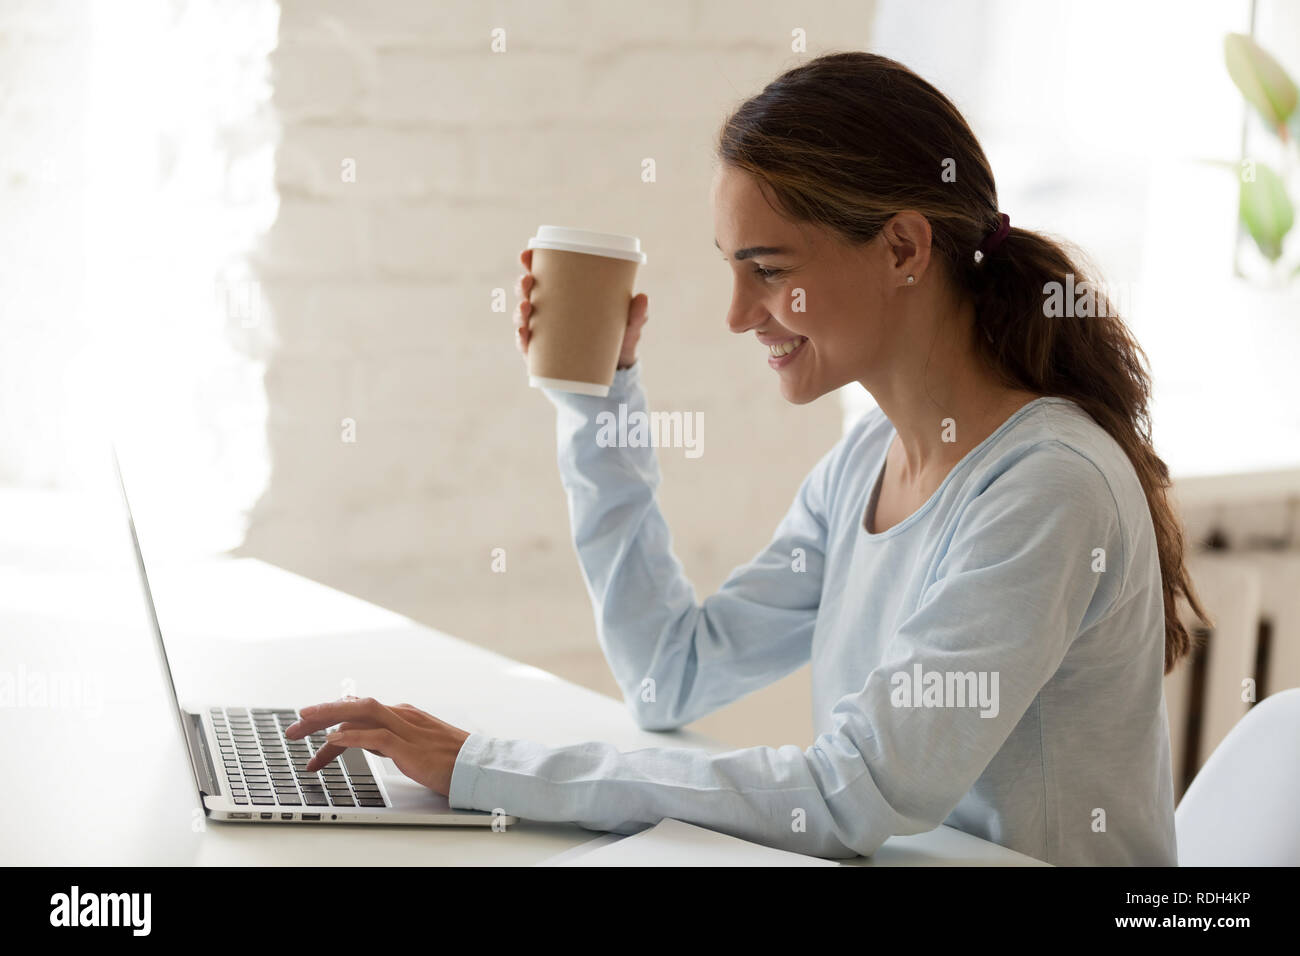 Smiling happy woman using laptop and drinking coffee Banque D'Images